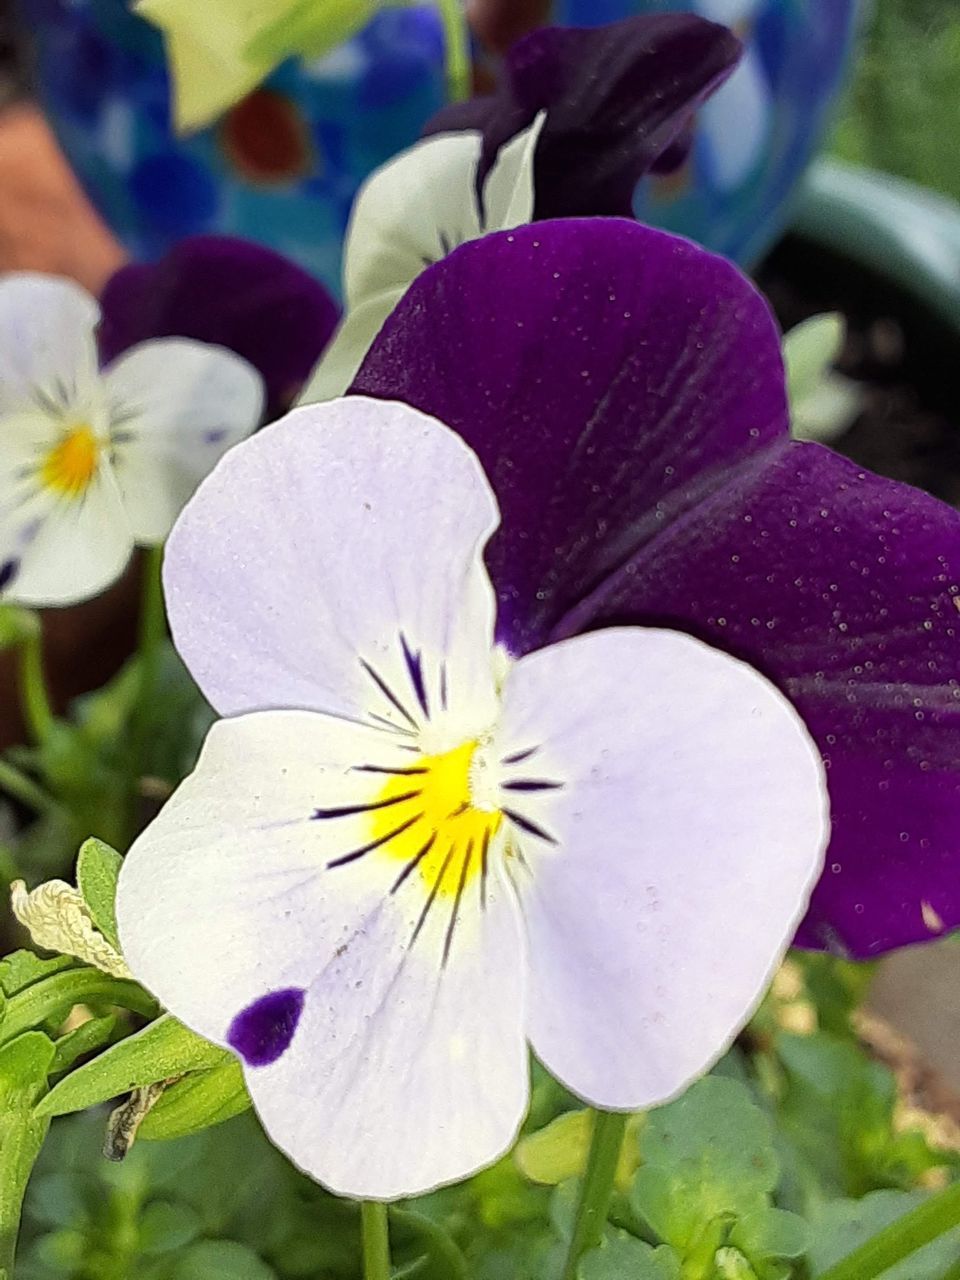 flower, flowering plant, plant, freshness, beauty in nature, pansy, fragility, petal, flower head, close-up, inflorescence, growth, nature, purple, focus on foreground, pollen, no people, wildflower, springtime, blossom, outdoors, botany, macro photography, day, yellow, leaf